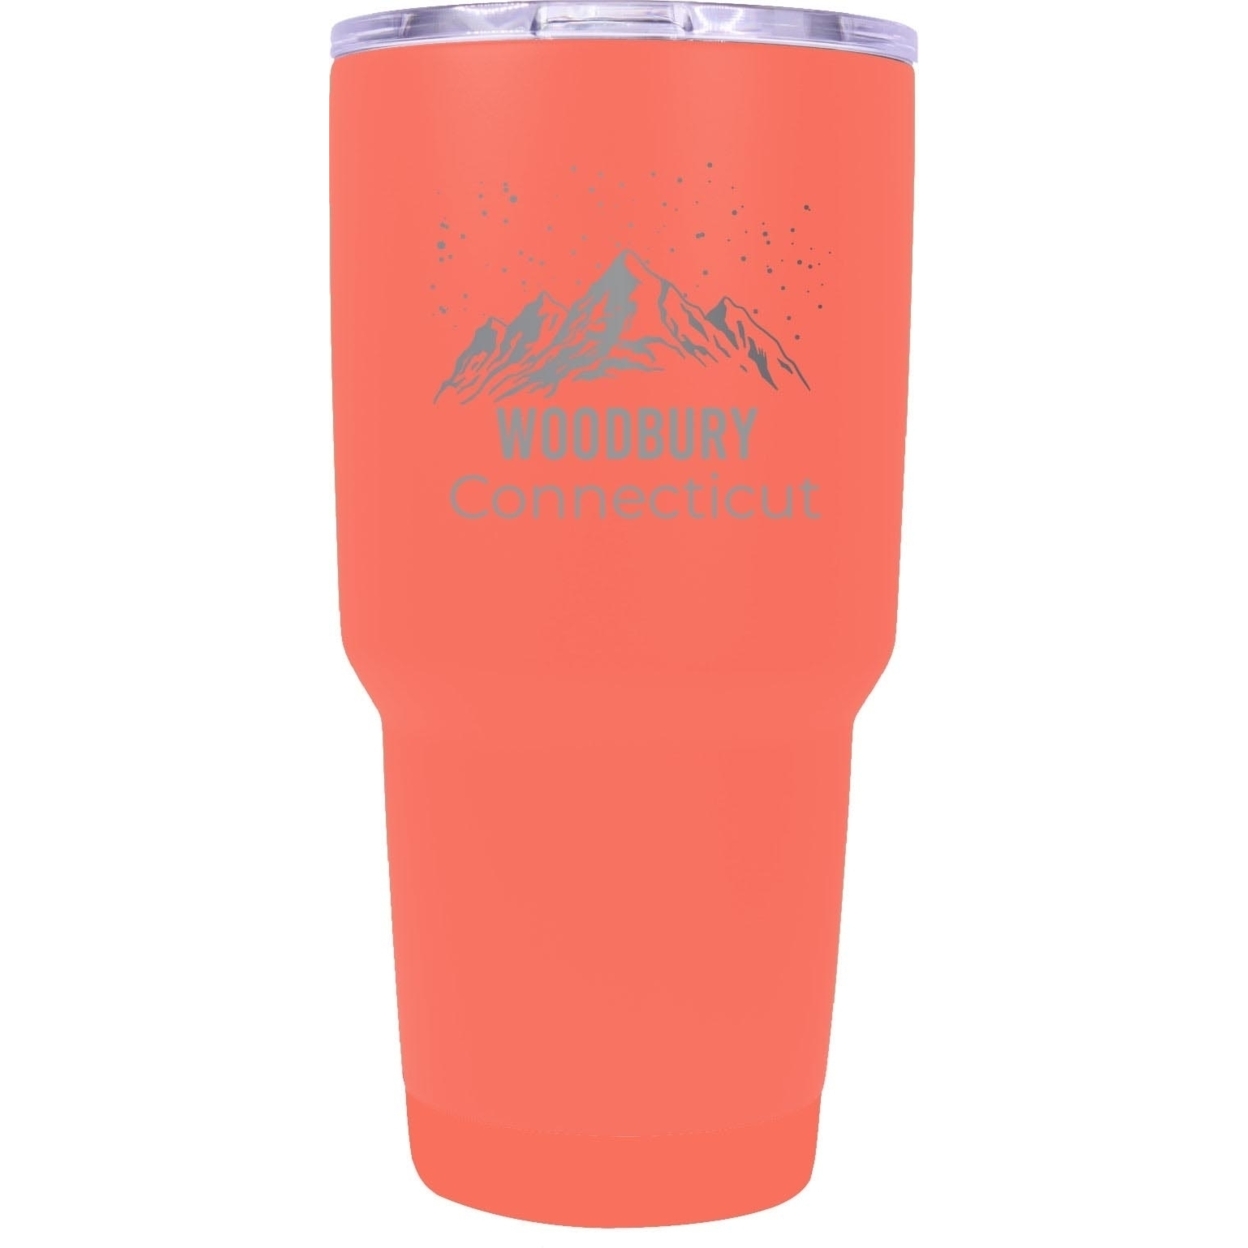 Woodbury Connecticut Ski Snowboard Winter Souvenir Laser Engraved 24 Oz Insulated Stainless Steel Tumbler - Coral